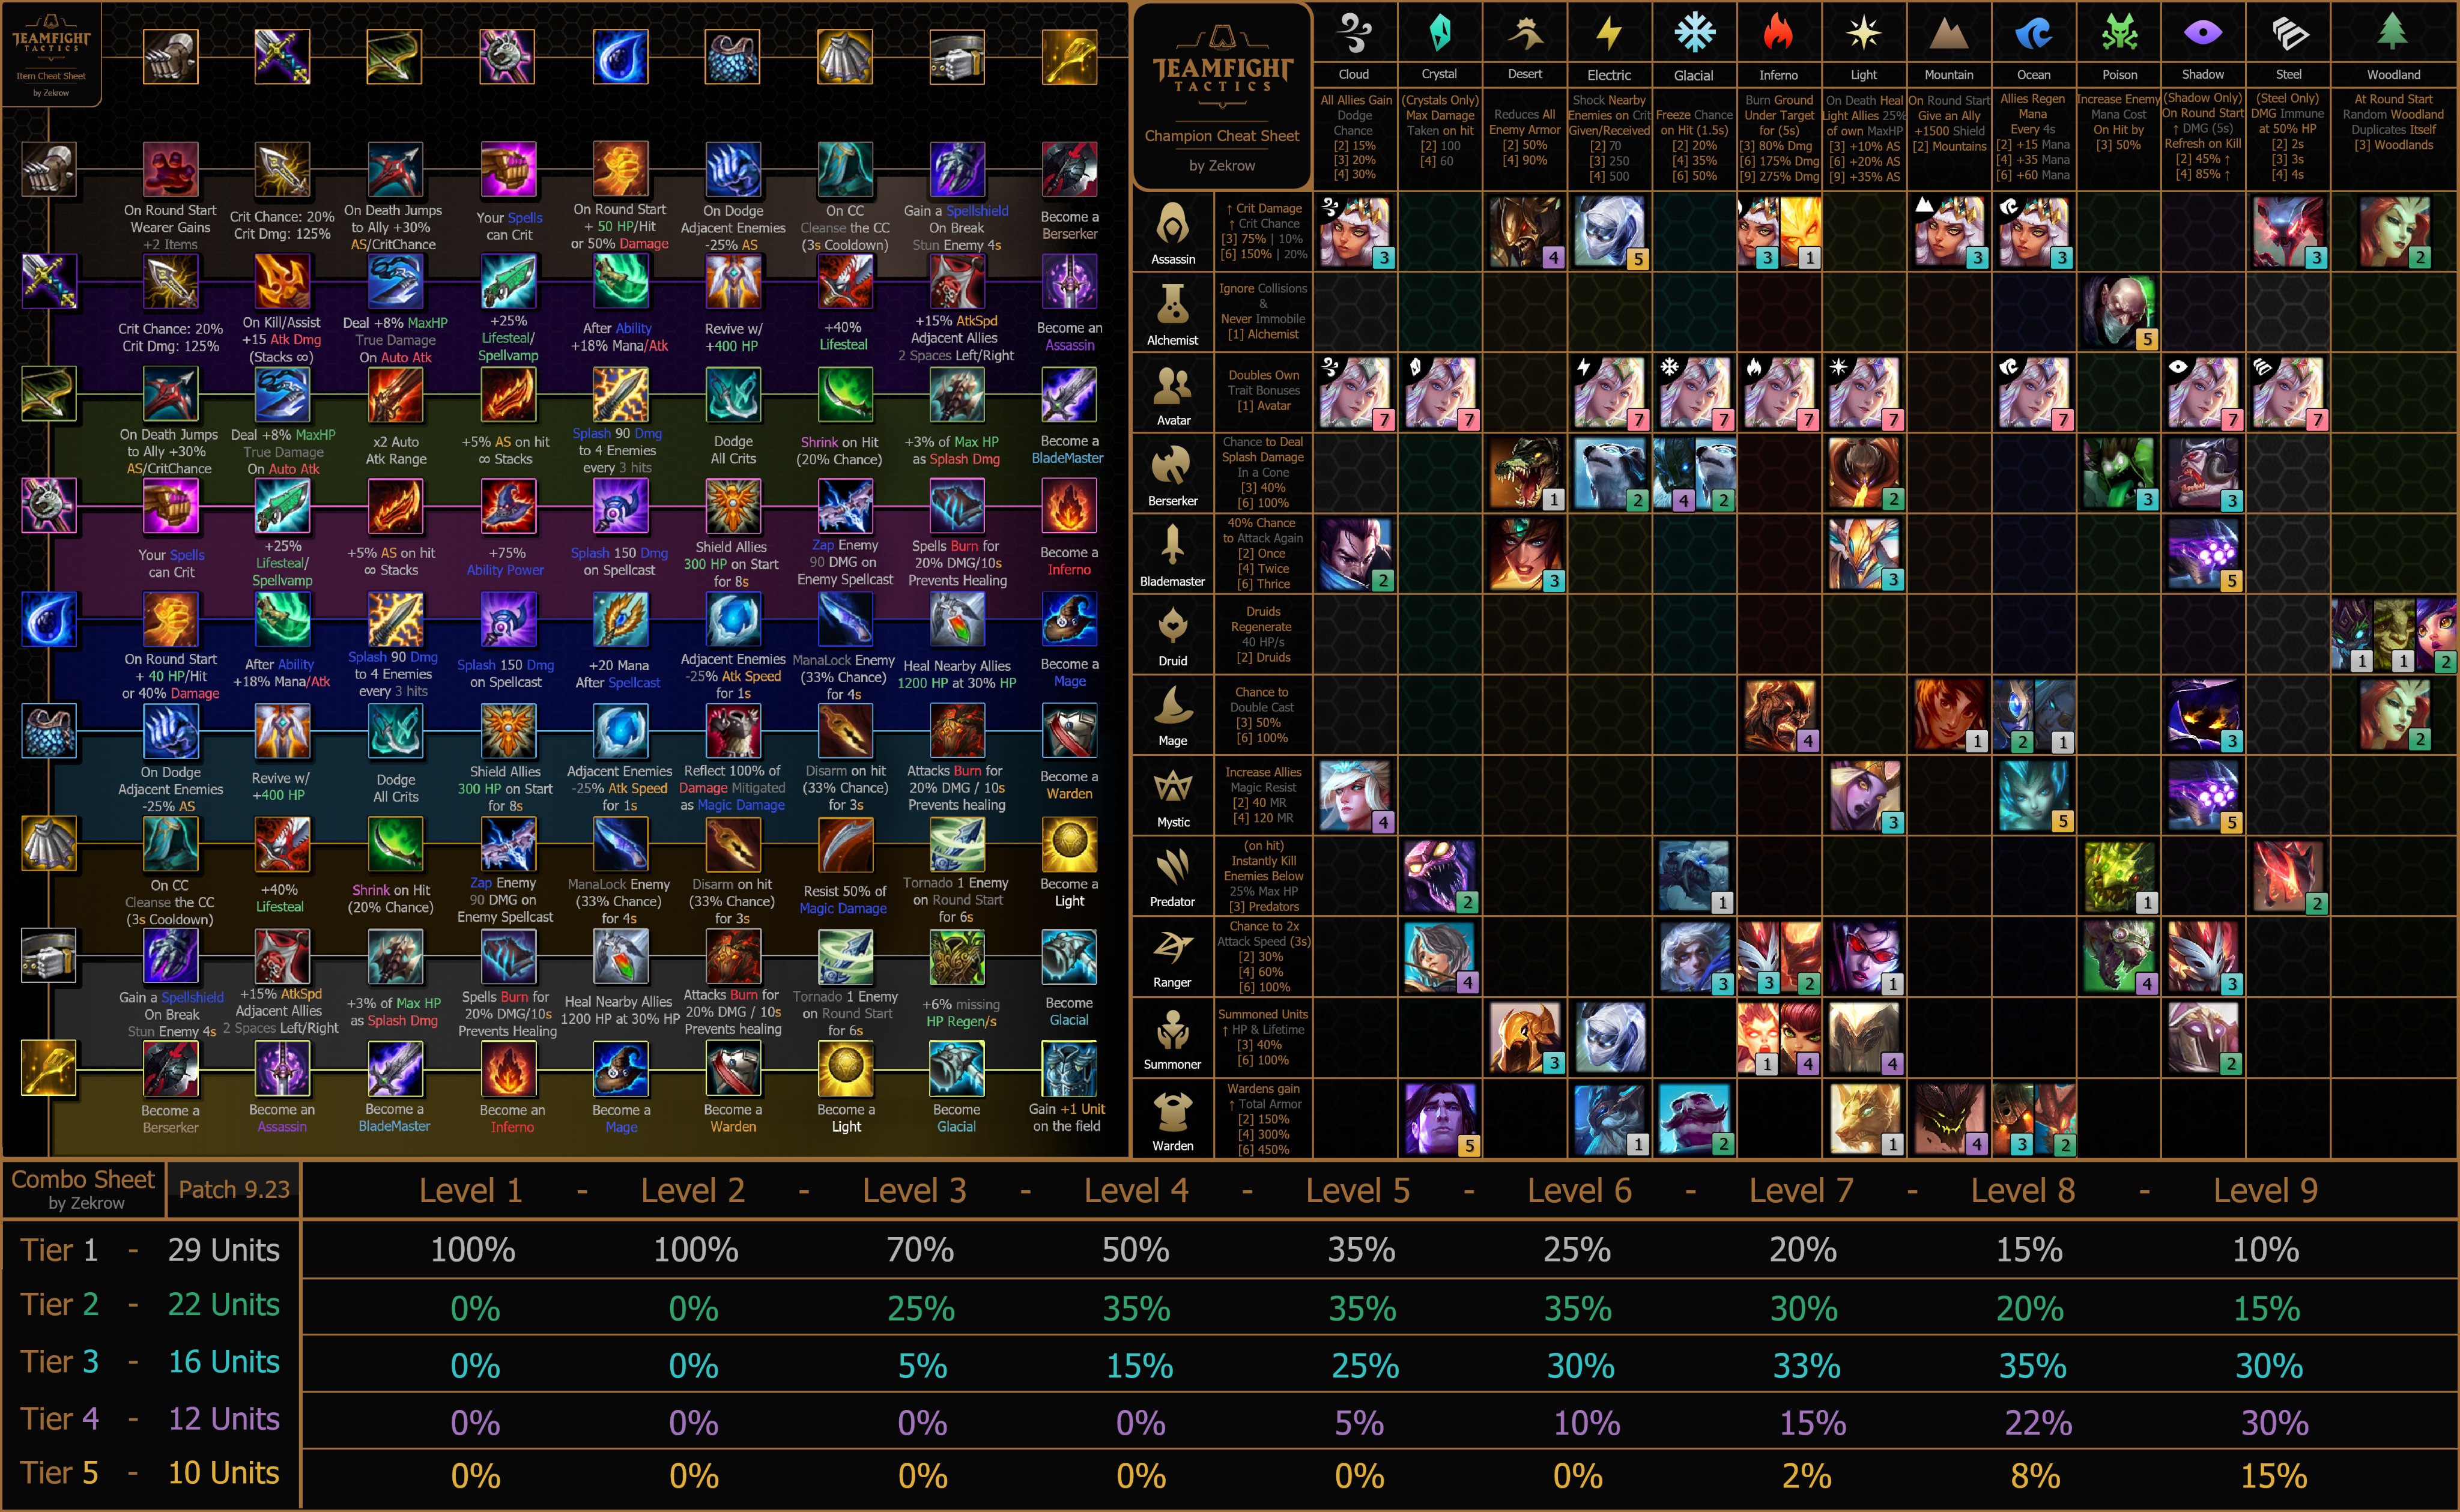 Zekrow on Twitter: "TeamfightTactics - Combo Sheet 16x9 - Items/ Champions/Synergies/DropRates (Updated 9.23) PS: Multiple versions on the reddit thread, choose what works for you! #TeamfightTactics #LeagueOfLegends #TFT https://t ...